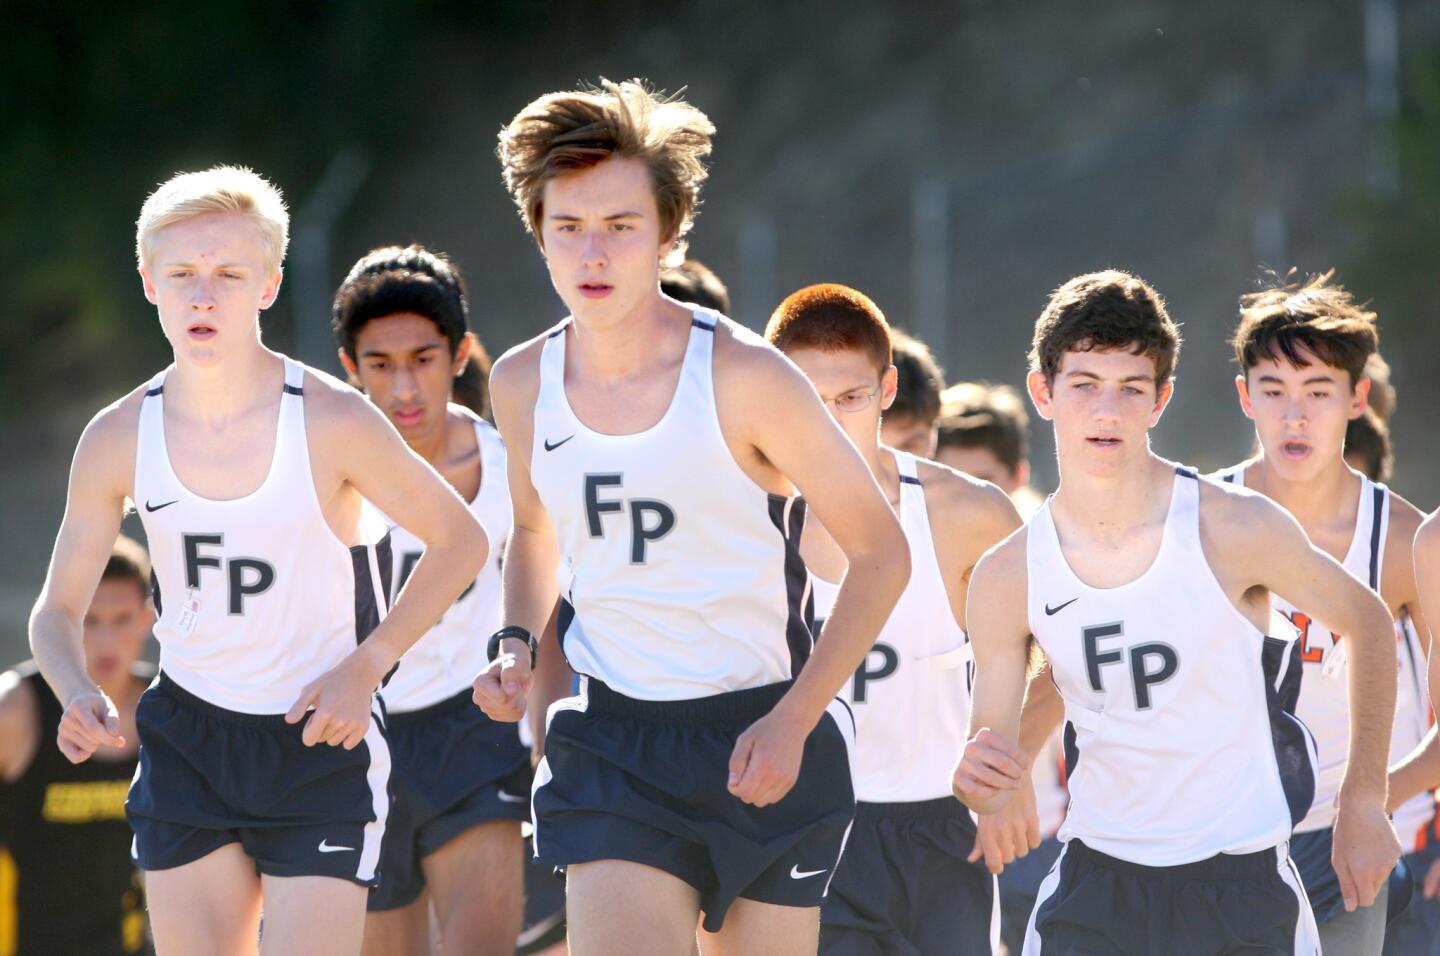 Flintridge Prep boys varsity cross country runners, led by Jack Van Scoter, center, took the league title with runners finishing in the top five spots at Prep League Cross Country Finals at Pierce College in Woodland Hills on Saturday, October 31, 2015.